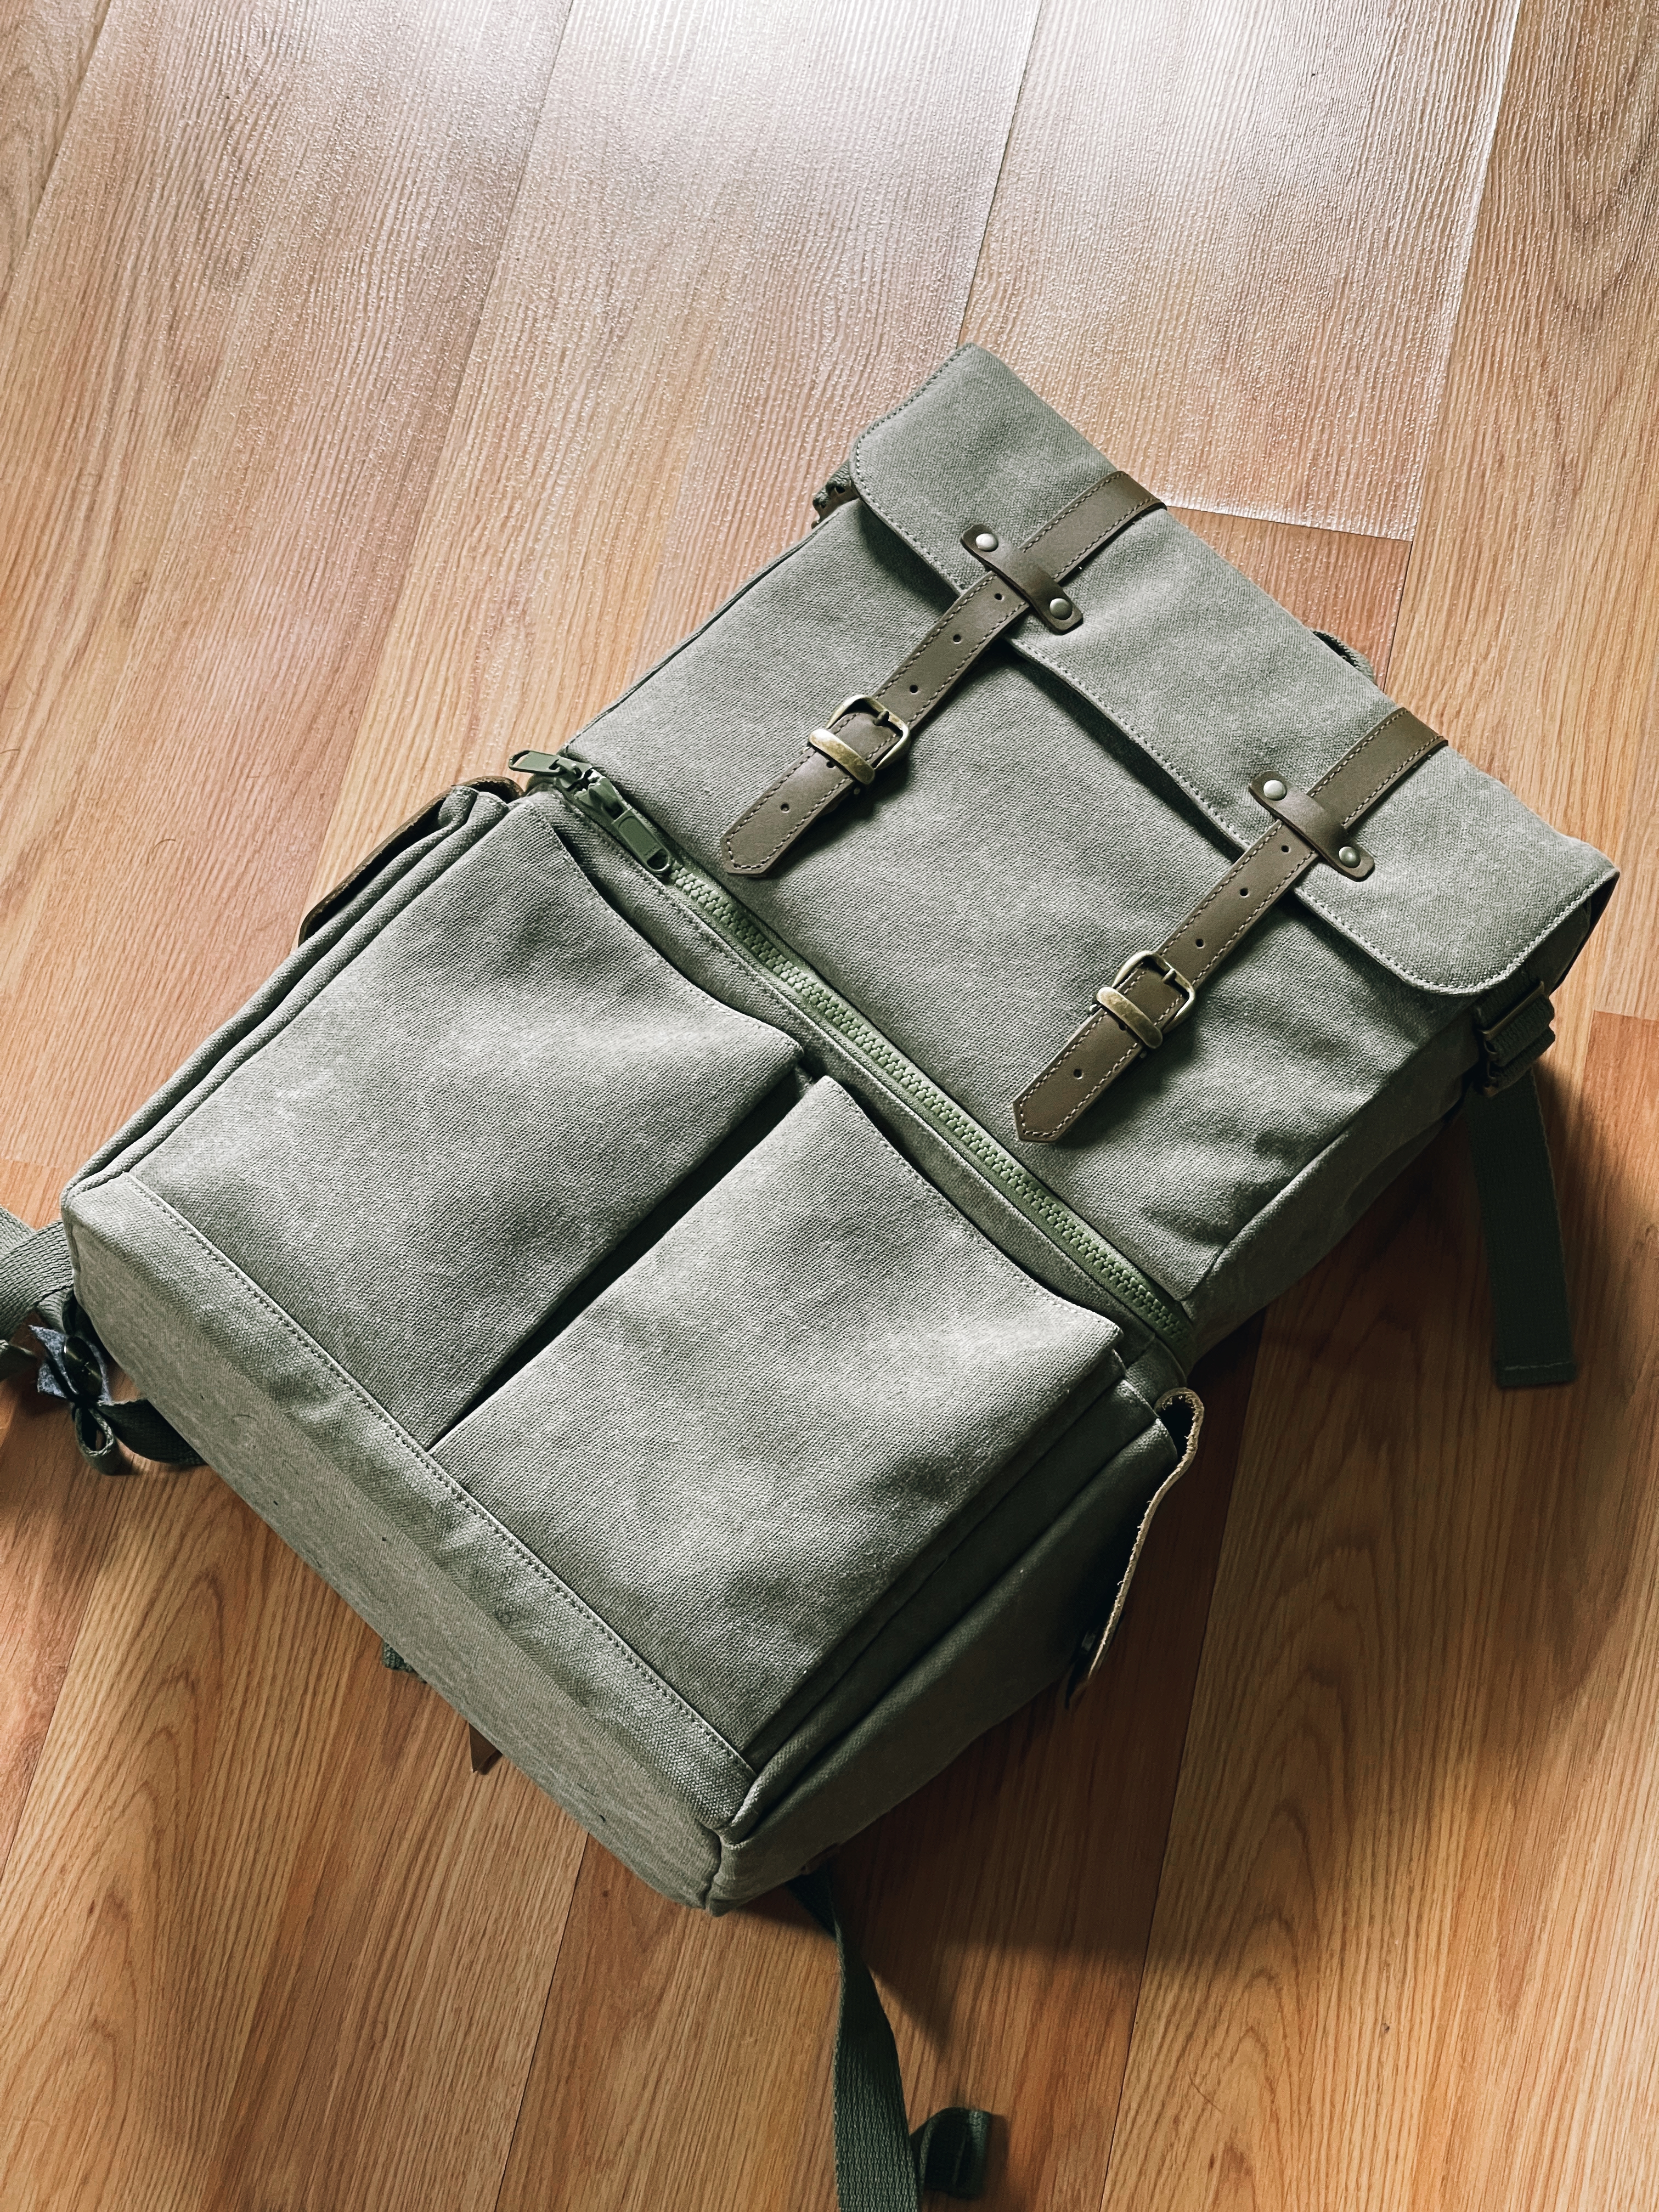 This is the Camera Bag I Bought Twice. And it’s Close to Perfect